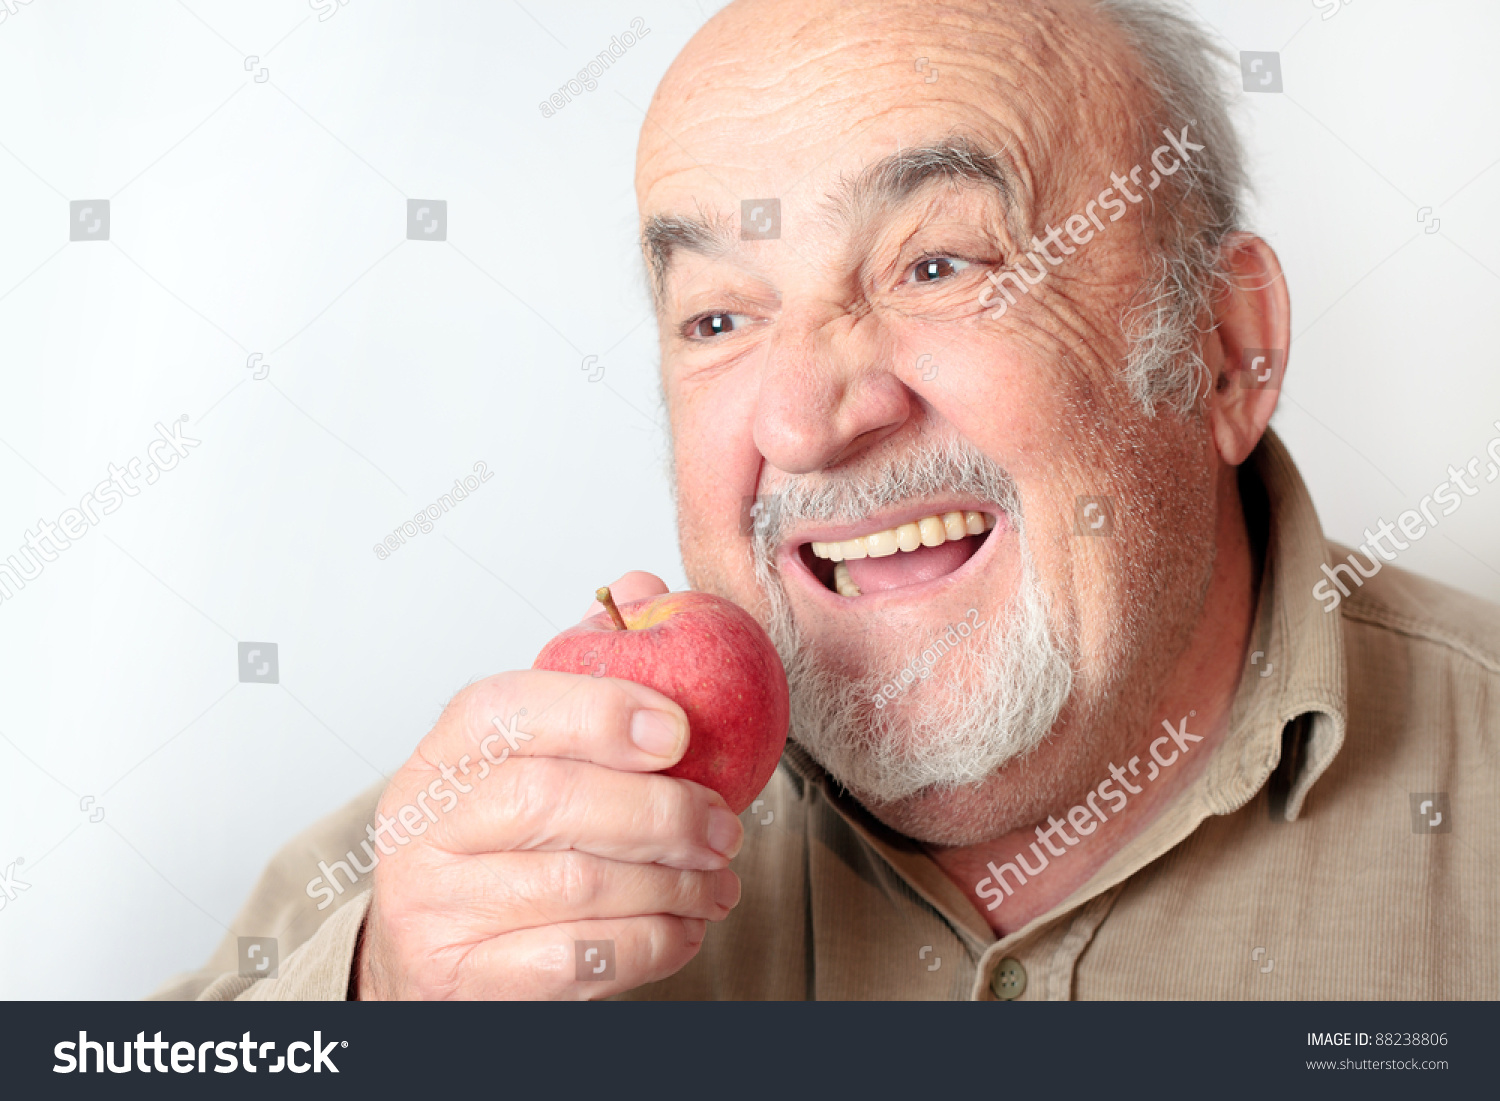 Old Man Eating Apple Stock Photo Edit Now 88238806